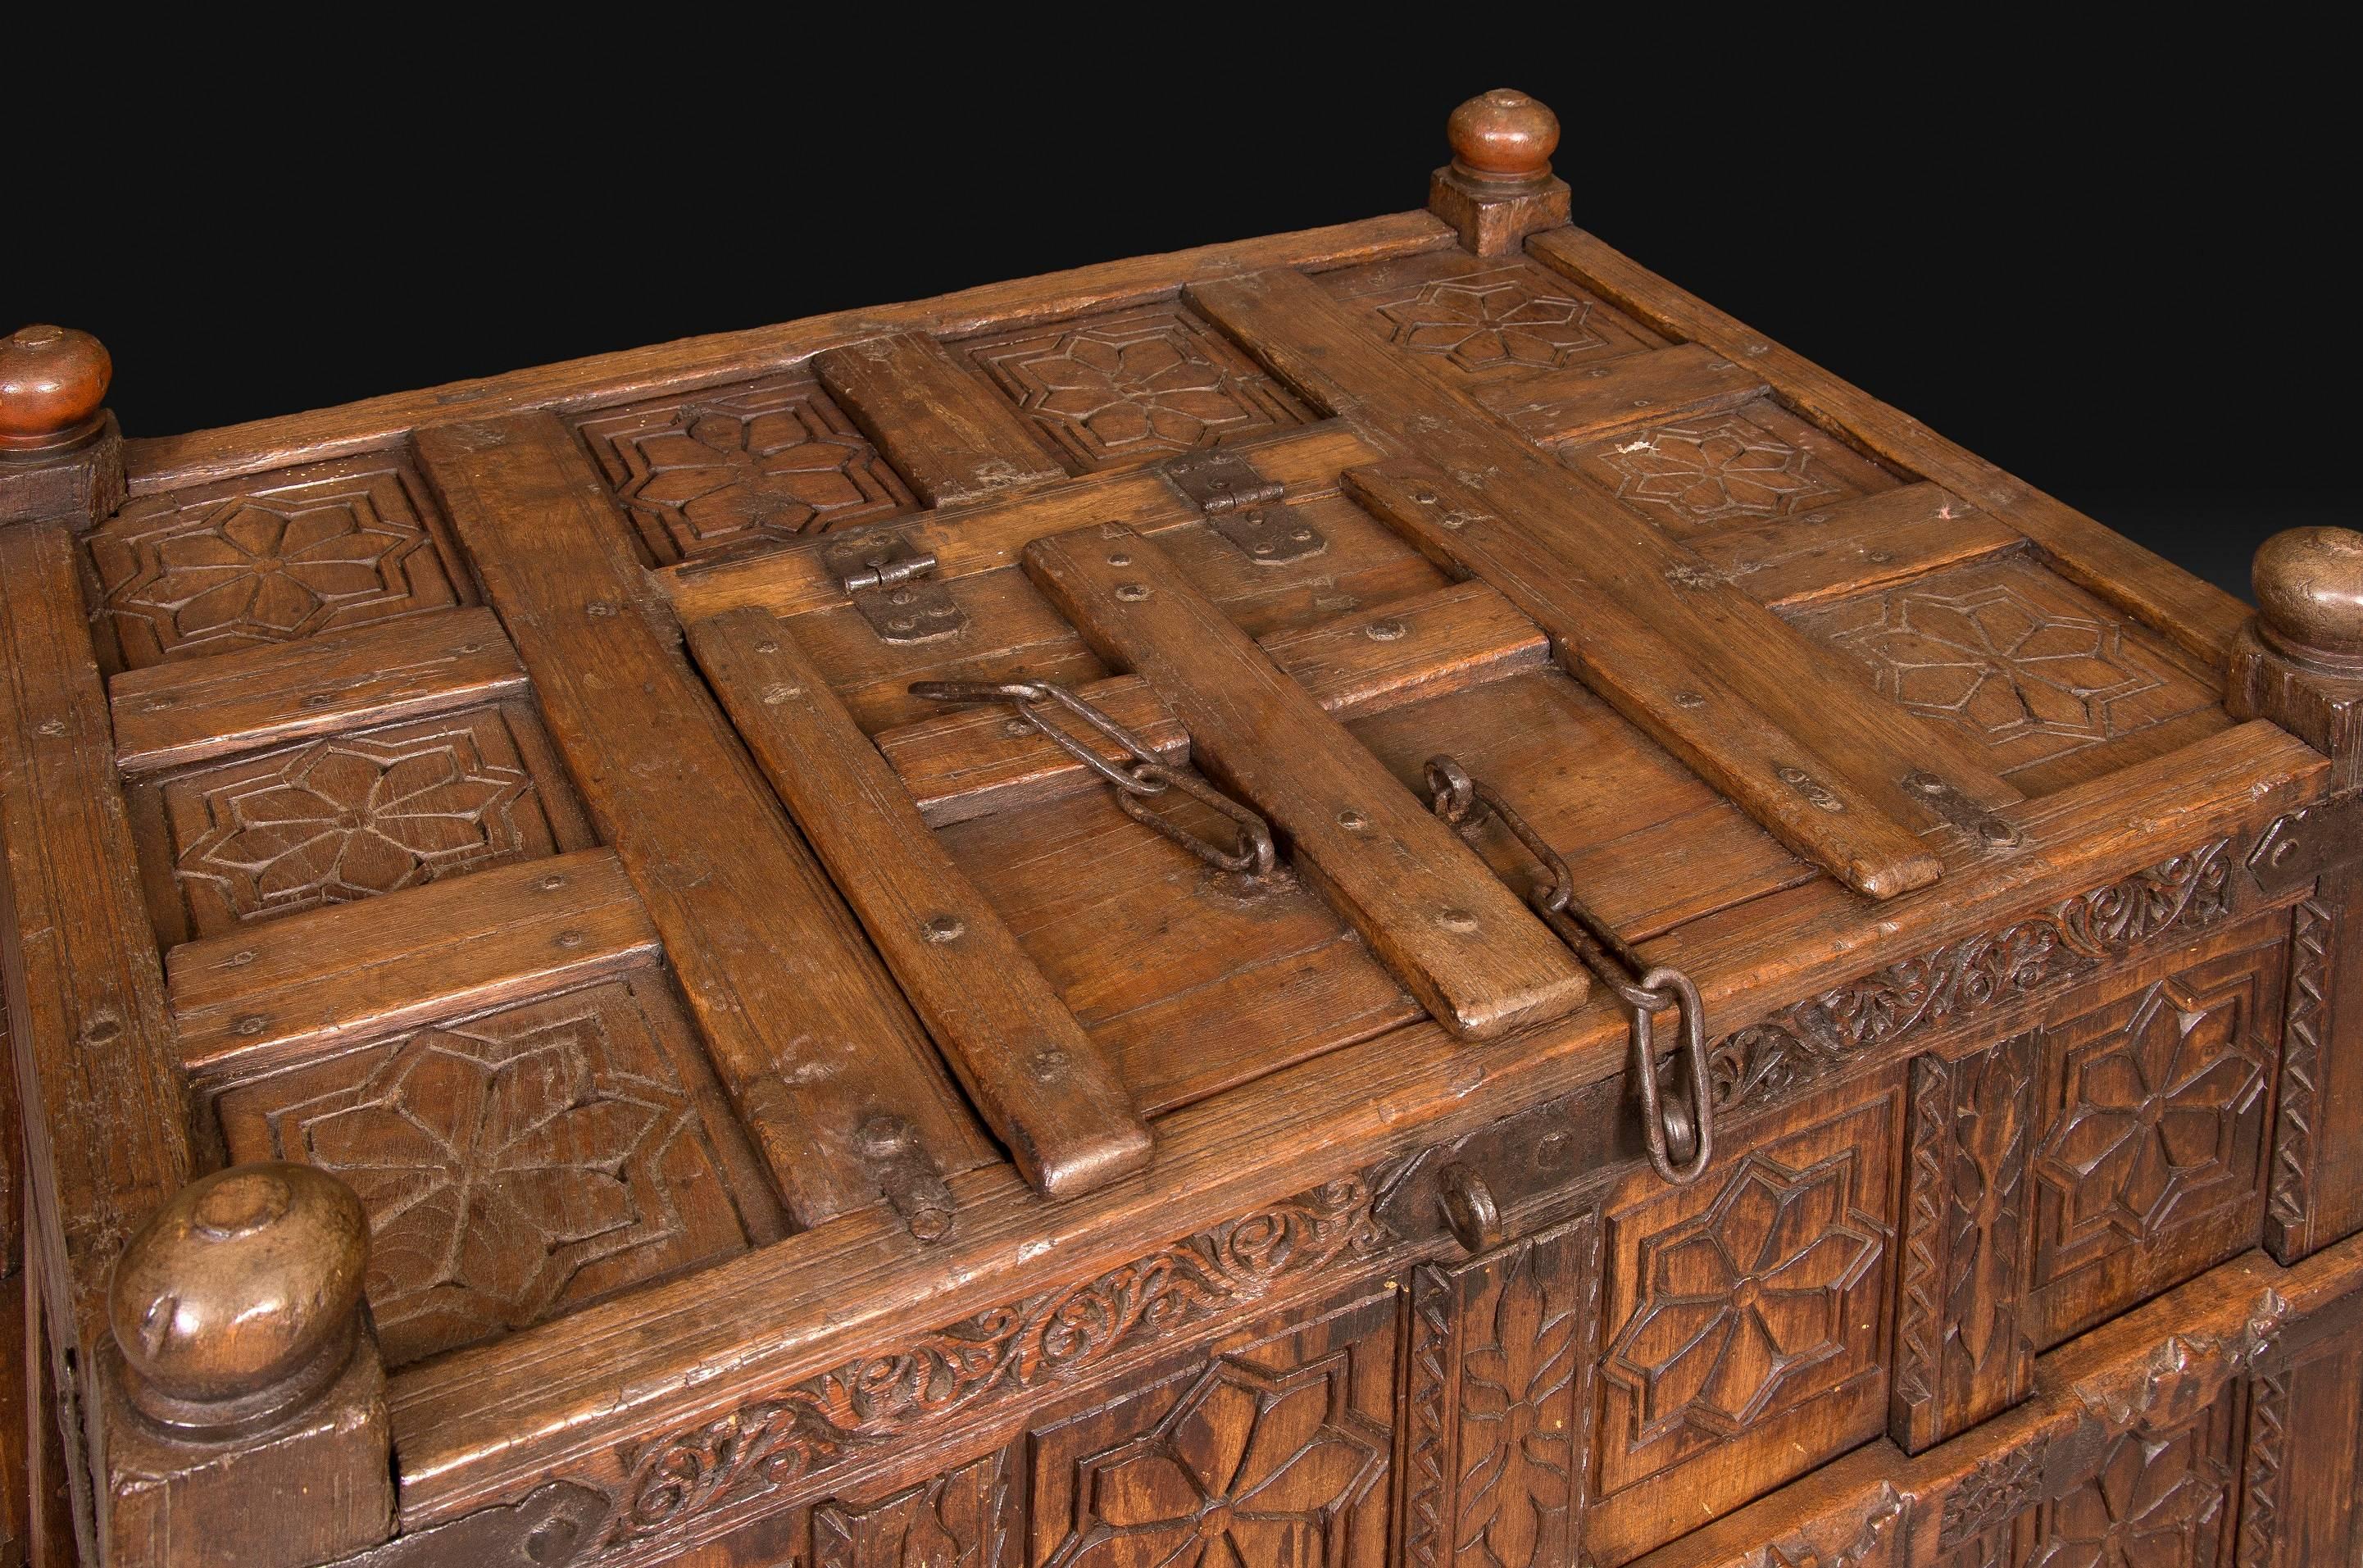 Wood and metal trunk with oriental decoration. Possibly La India, 19th-20th centuries.
Carved wooden chest raised on carved legs that presents a series of panels with simple vegetal elements carved and a division in striking cuarterones. It also